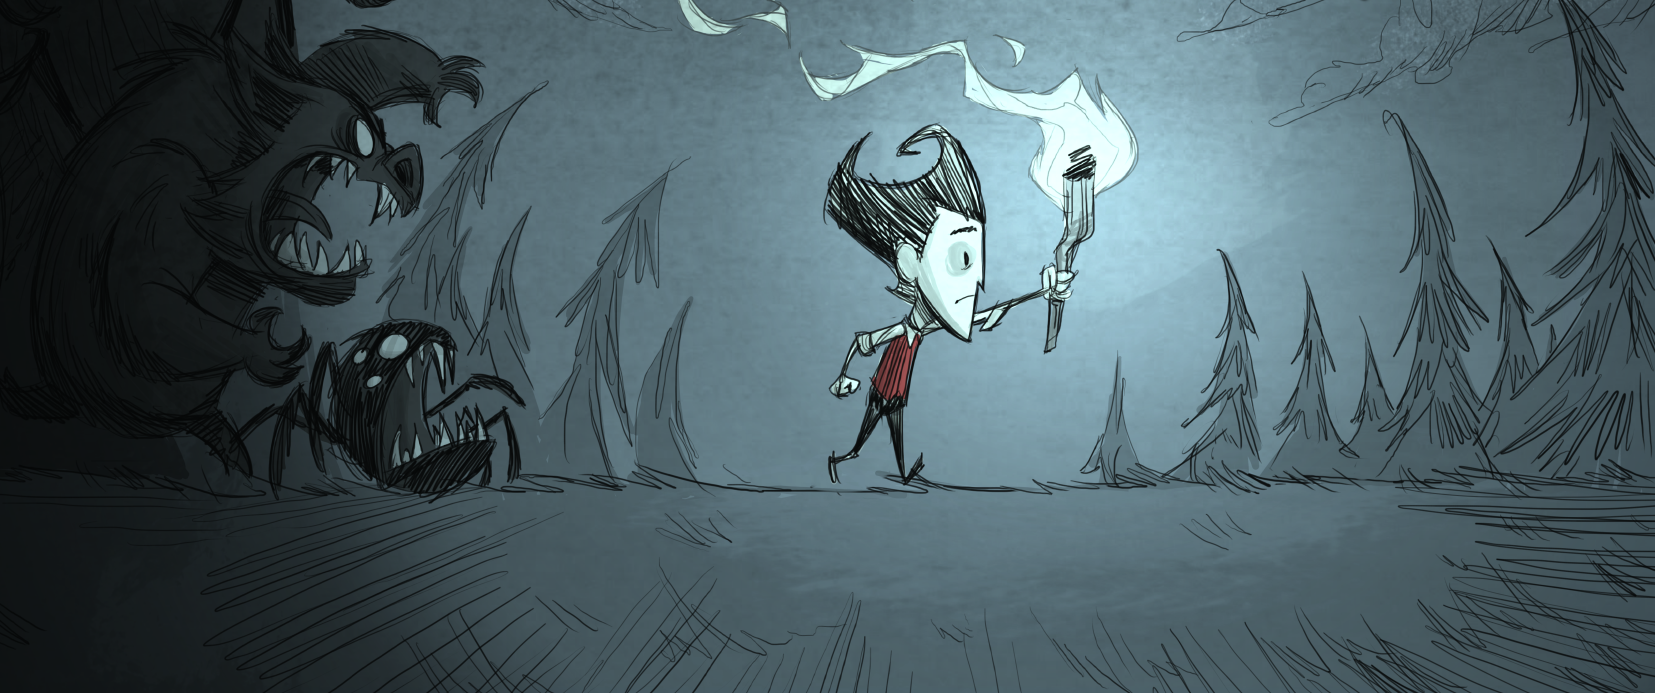 Don t start new. Донт старв. Лес из донт старв. УЛИПАХА донт старв. Don't Starve together осенний лес.